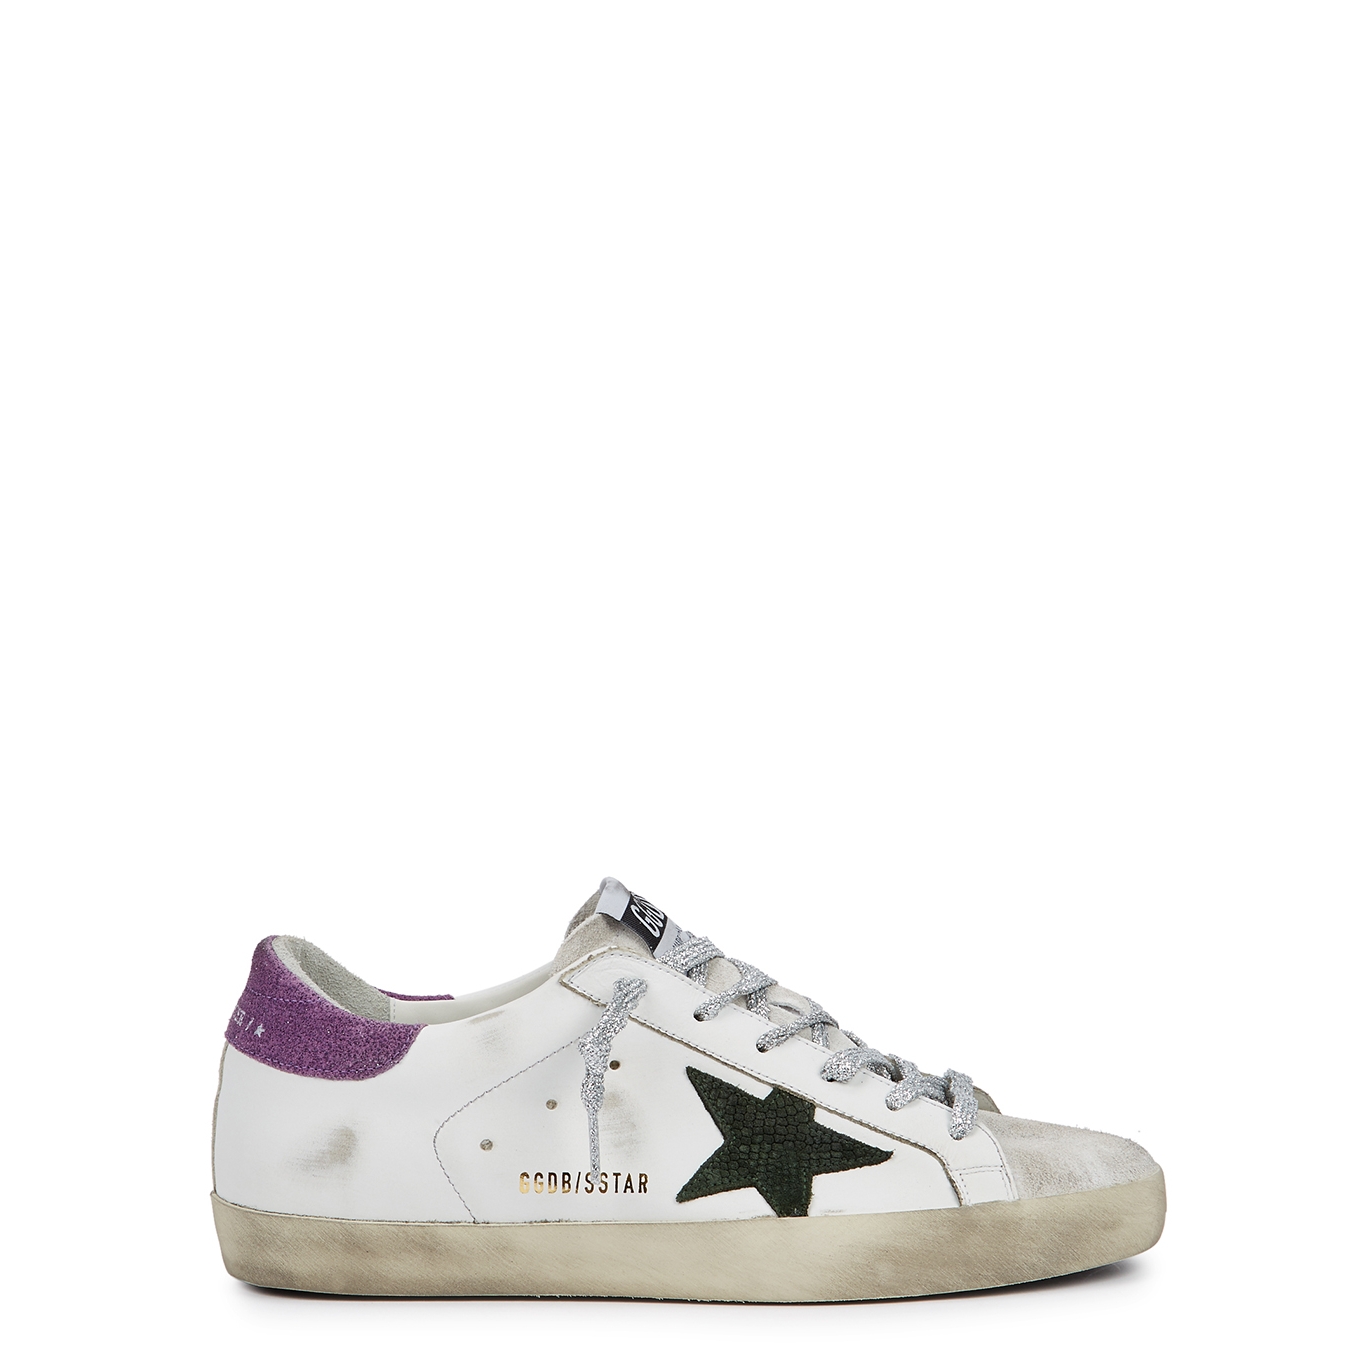 Golden Goose Superstar Distressed Leather Sneakers - White And Green - 3